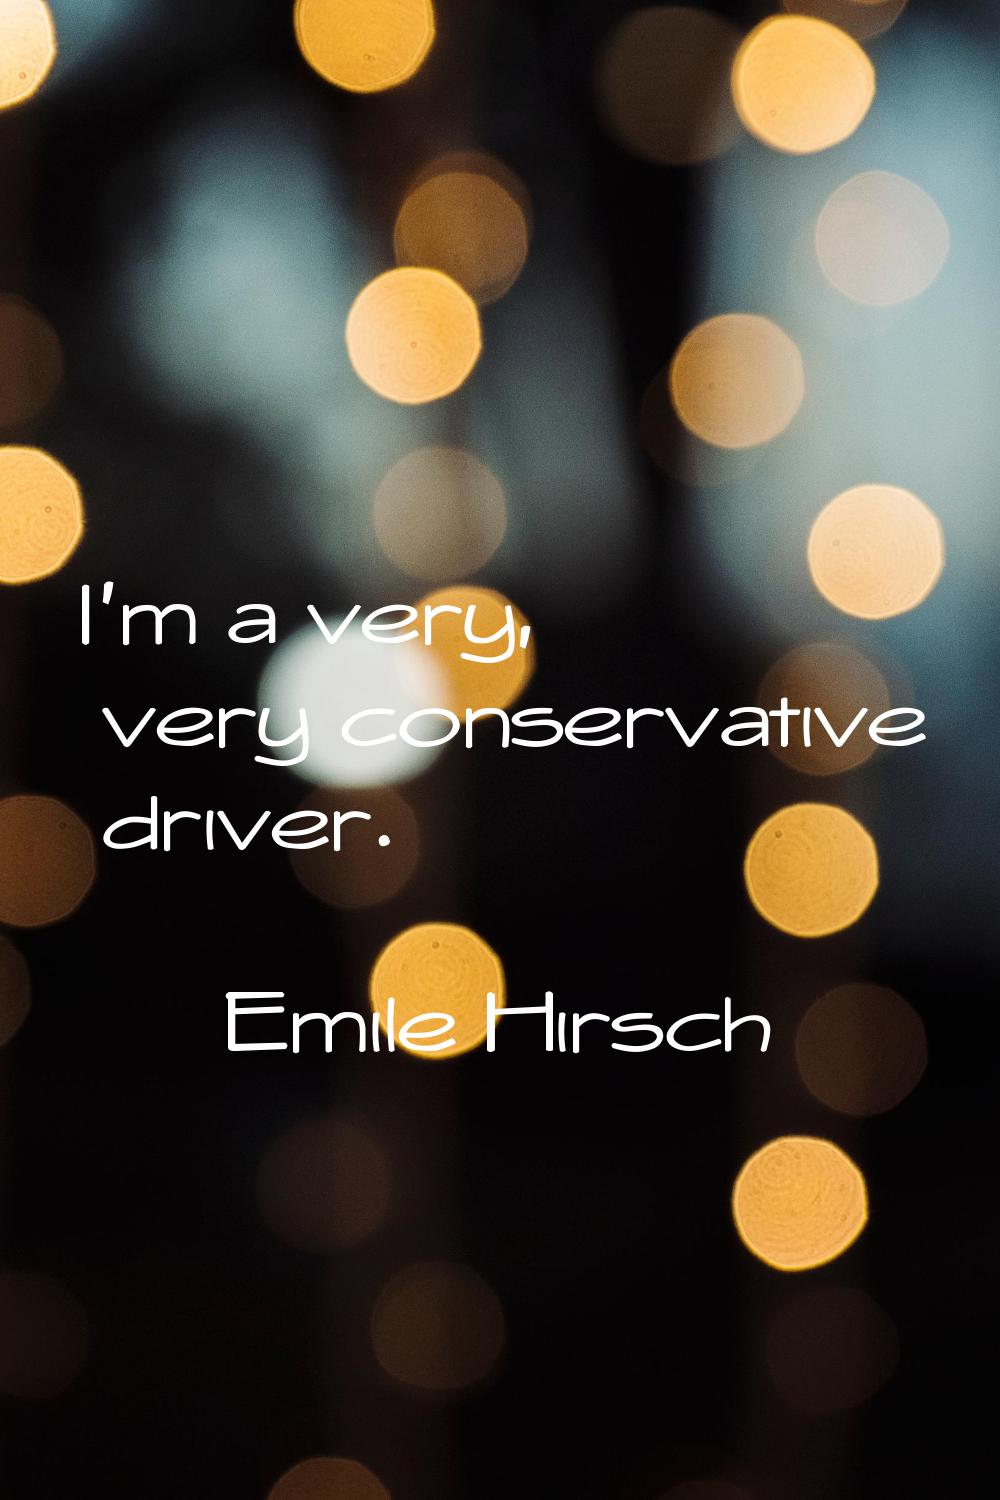 I'm a very, very conservative driver.